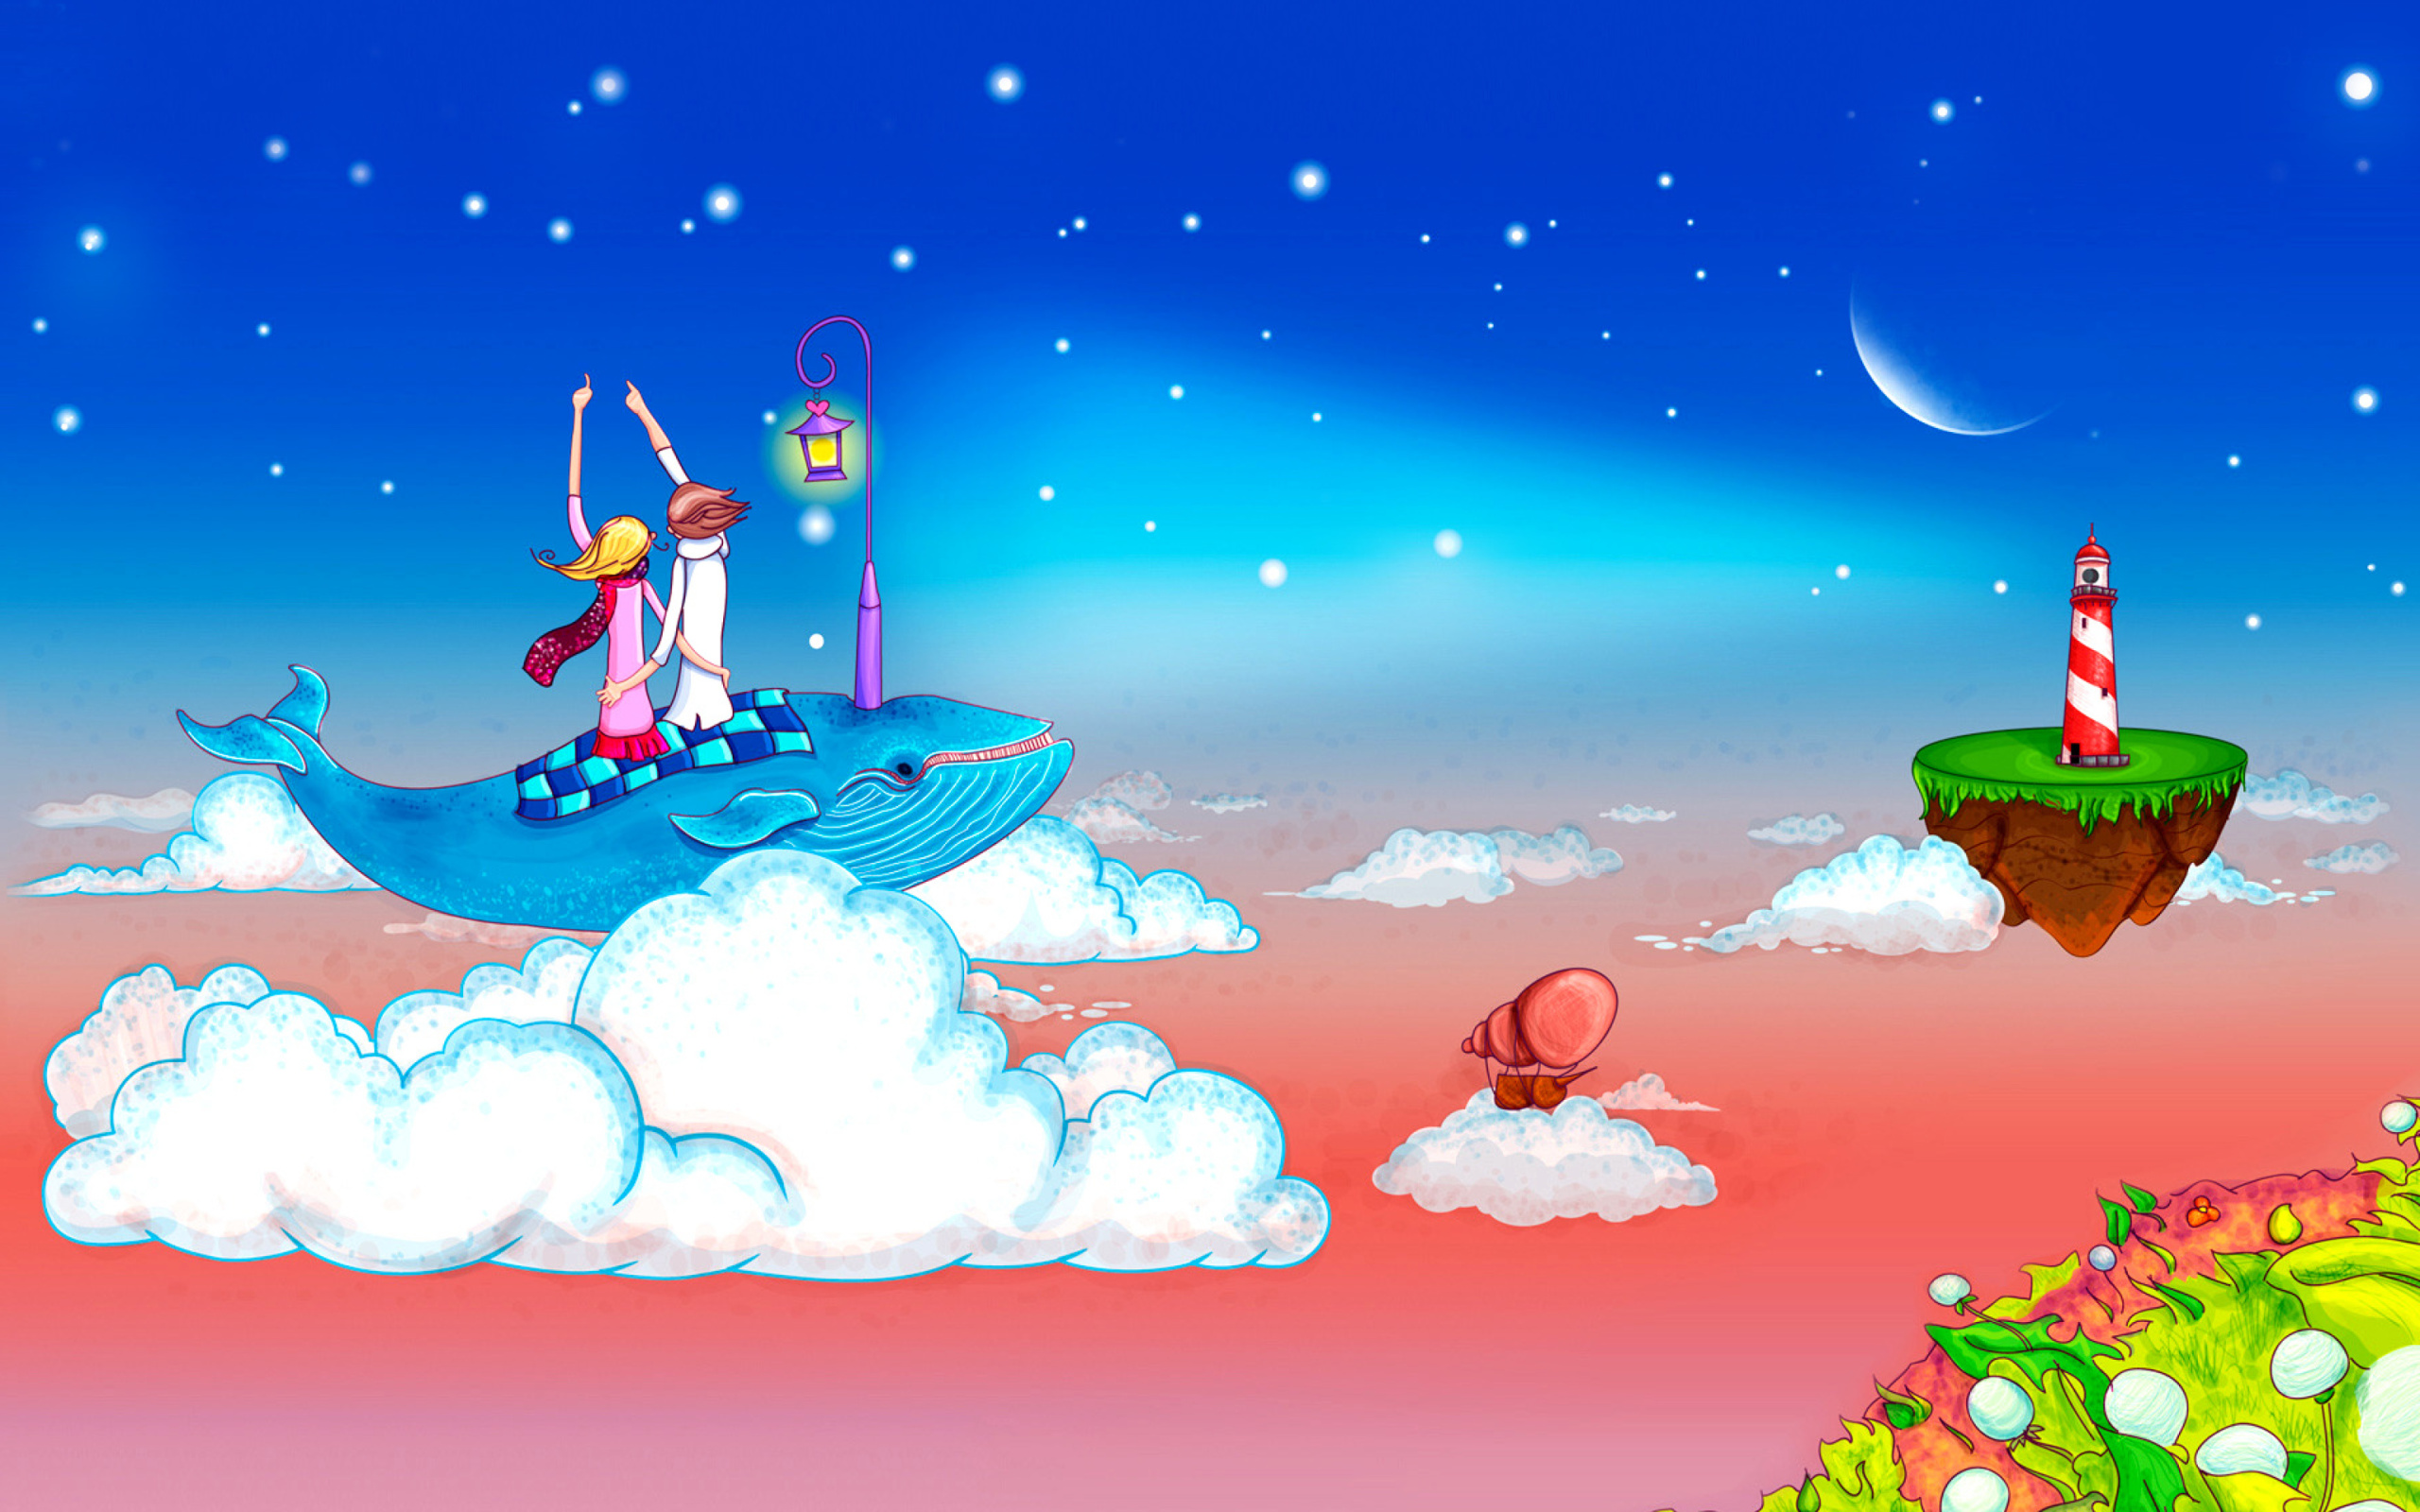 Love on Clouds wallpaper 2560x1600